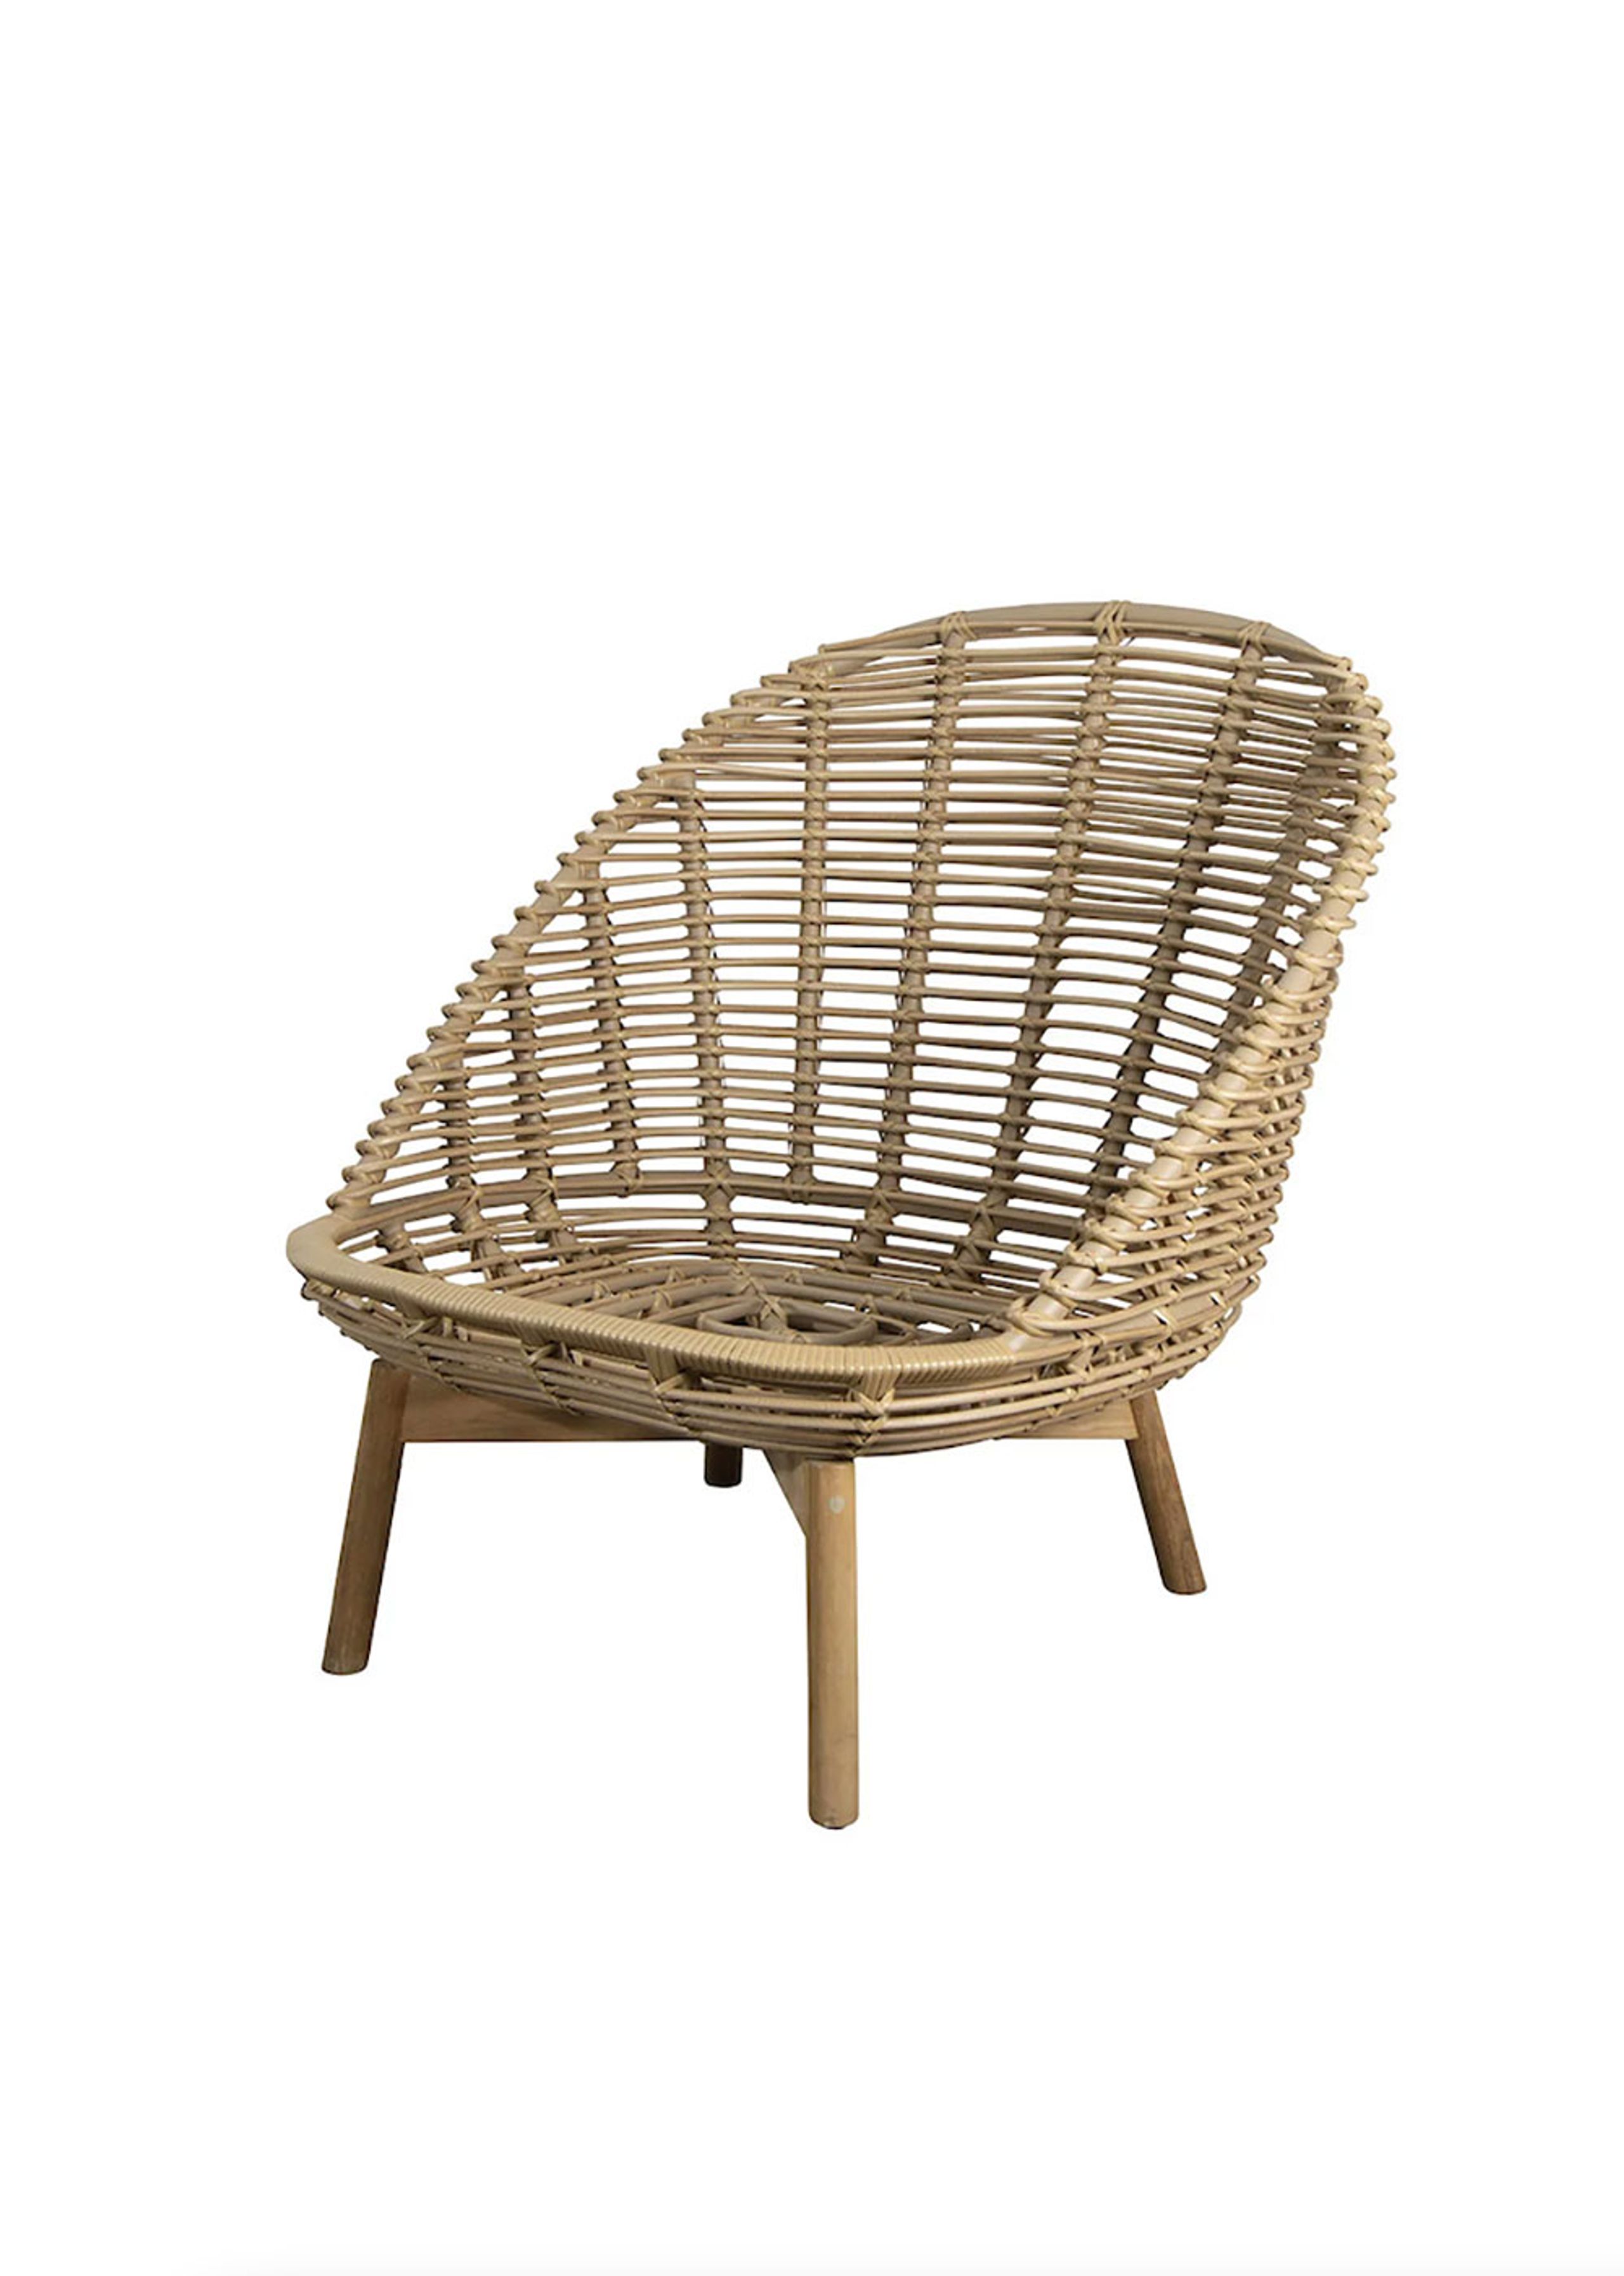 Cane-line - Loungesessel - Hive Lounge Chair - Seat: Natural, Cane-line Weave UT 3 / Cushion: Taupe, Cane-line AirTouch